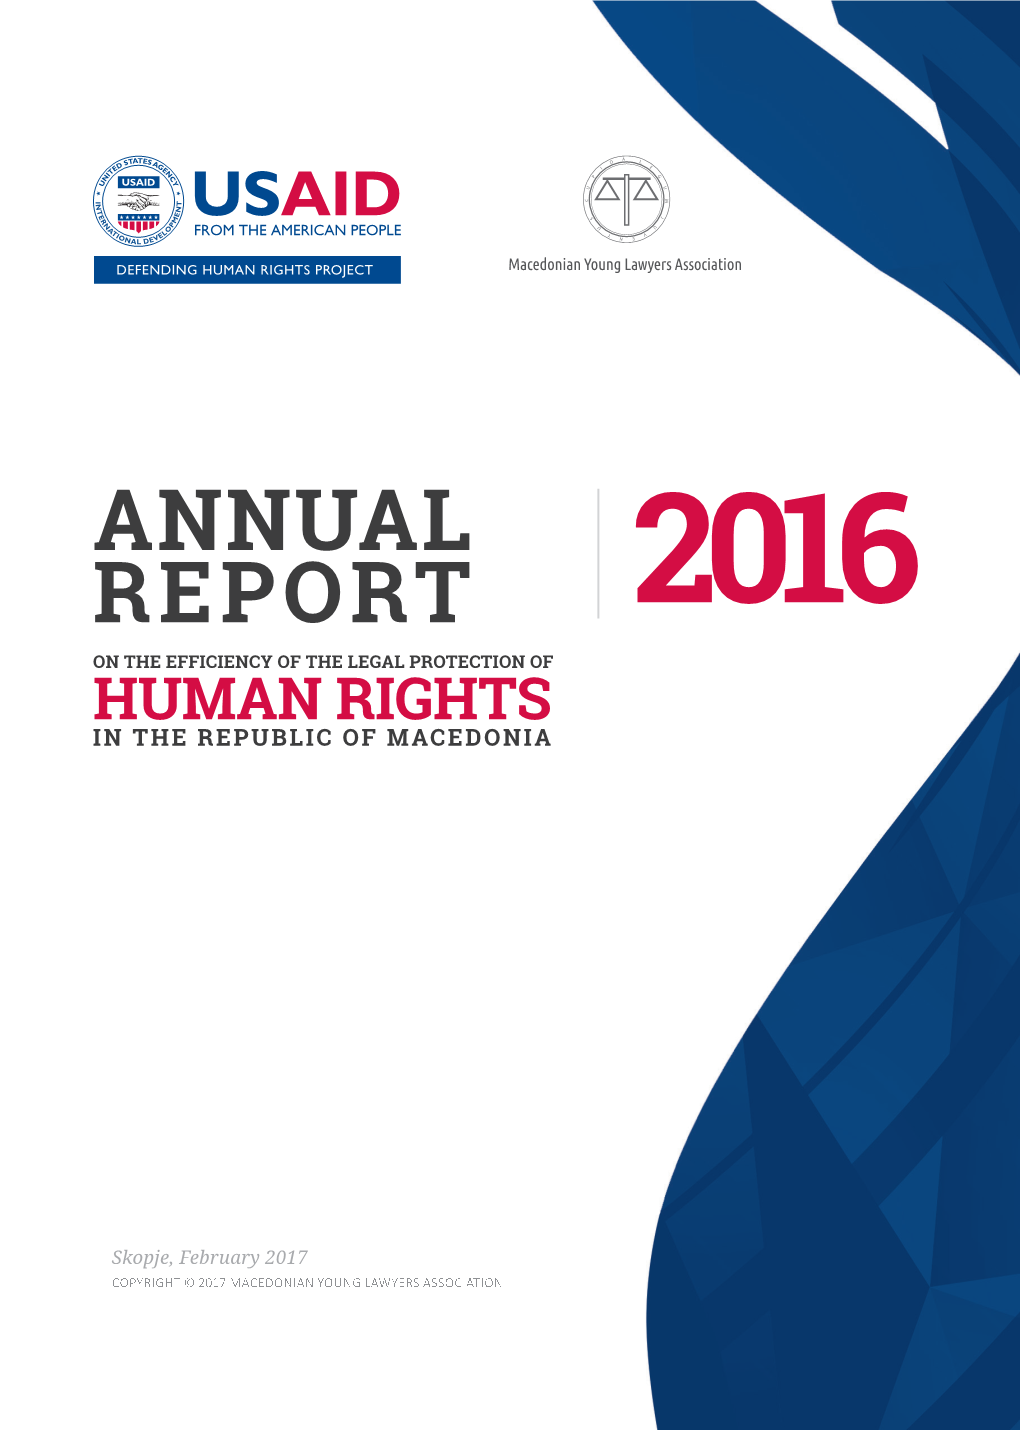 2016 Annual Report on the Efficiency of Legal Protection of Human Rights In